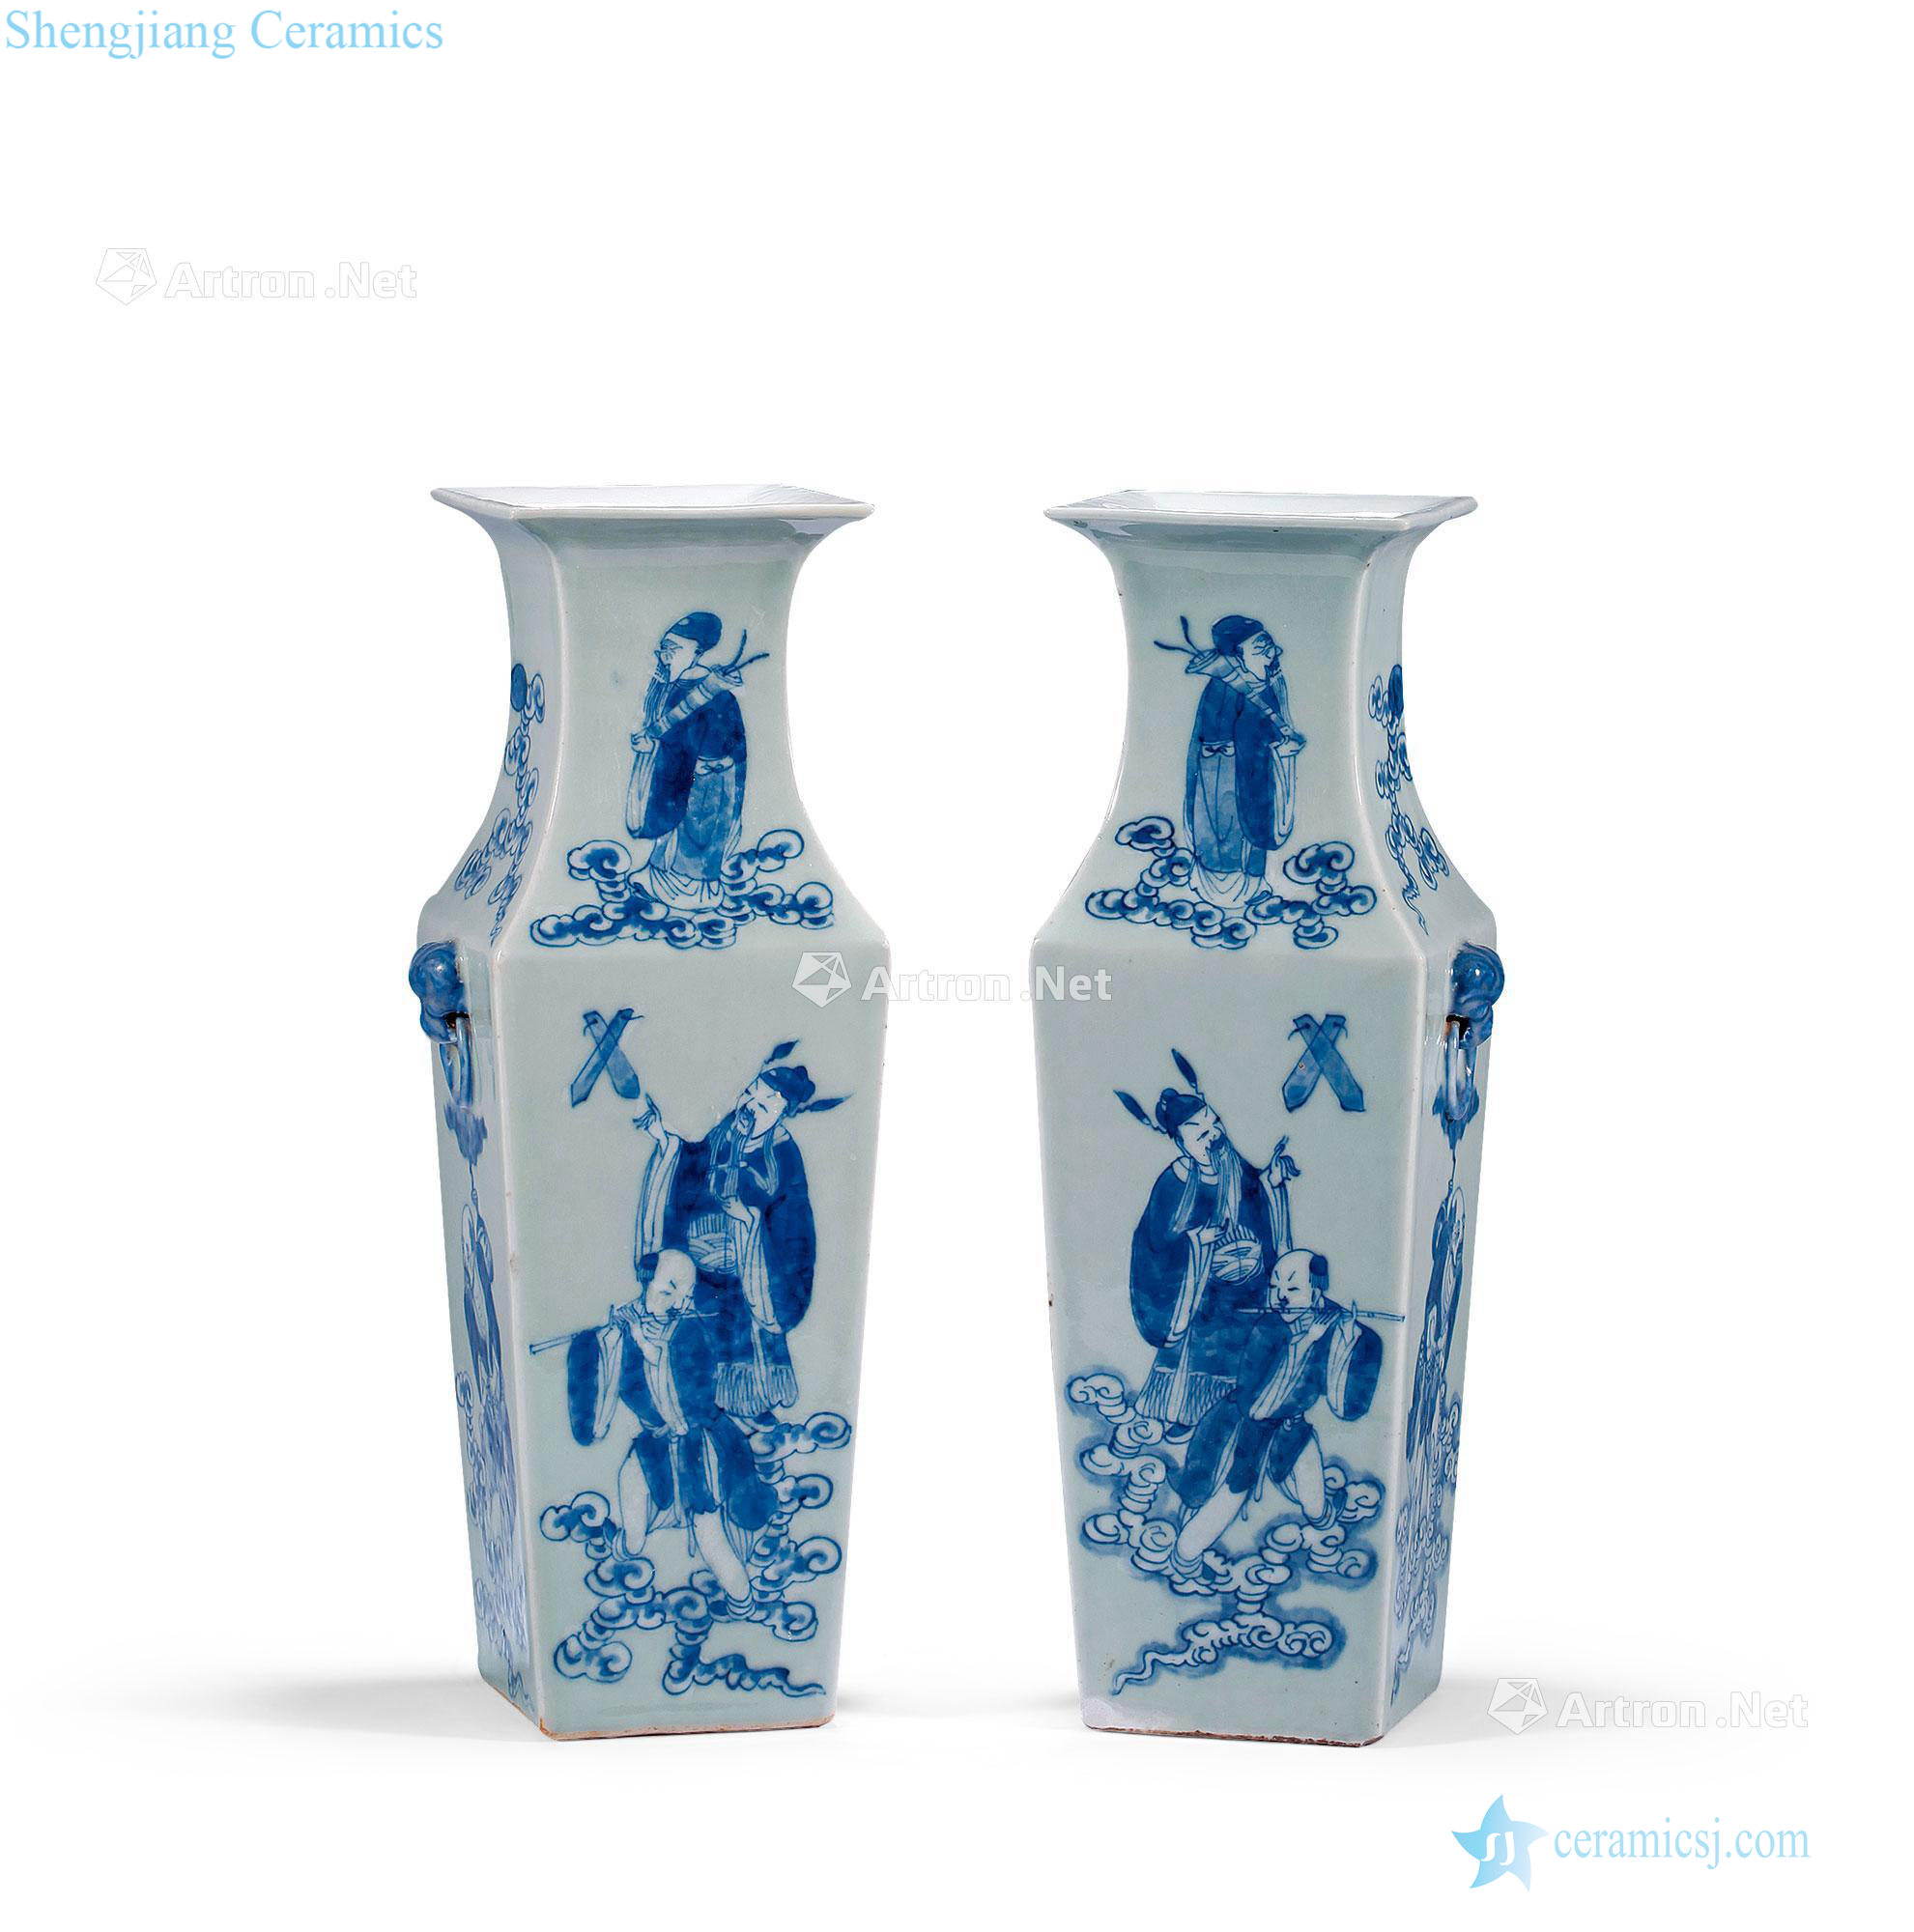 Qing pea green glaze porcelain of the eight immortals people square bottle (a)